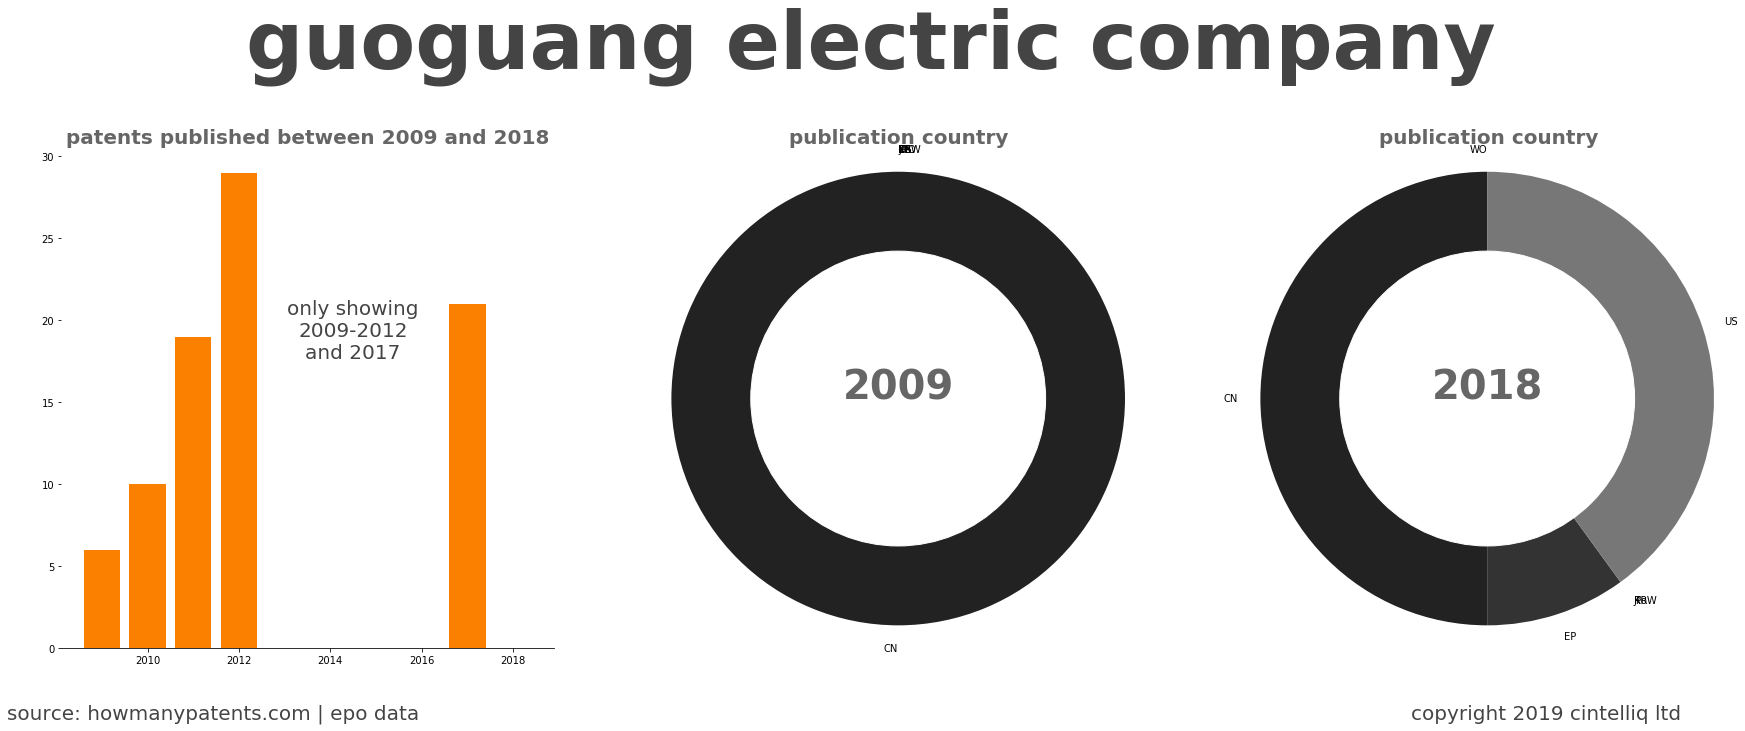 summary of patents for Guoguang Electric Company